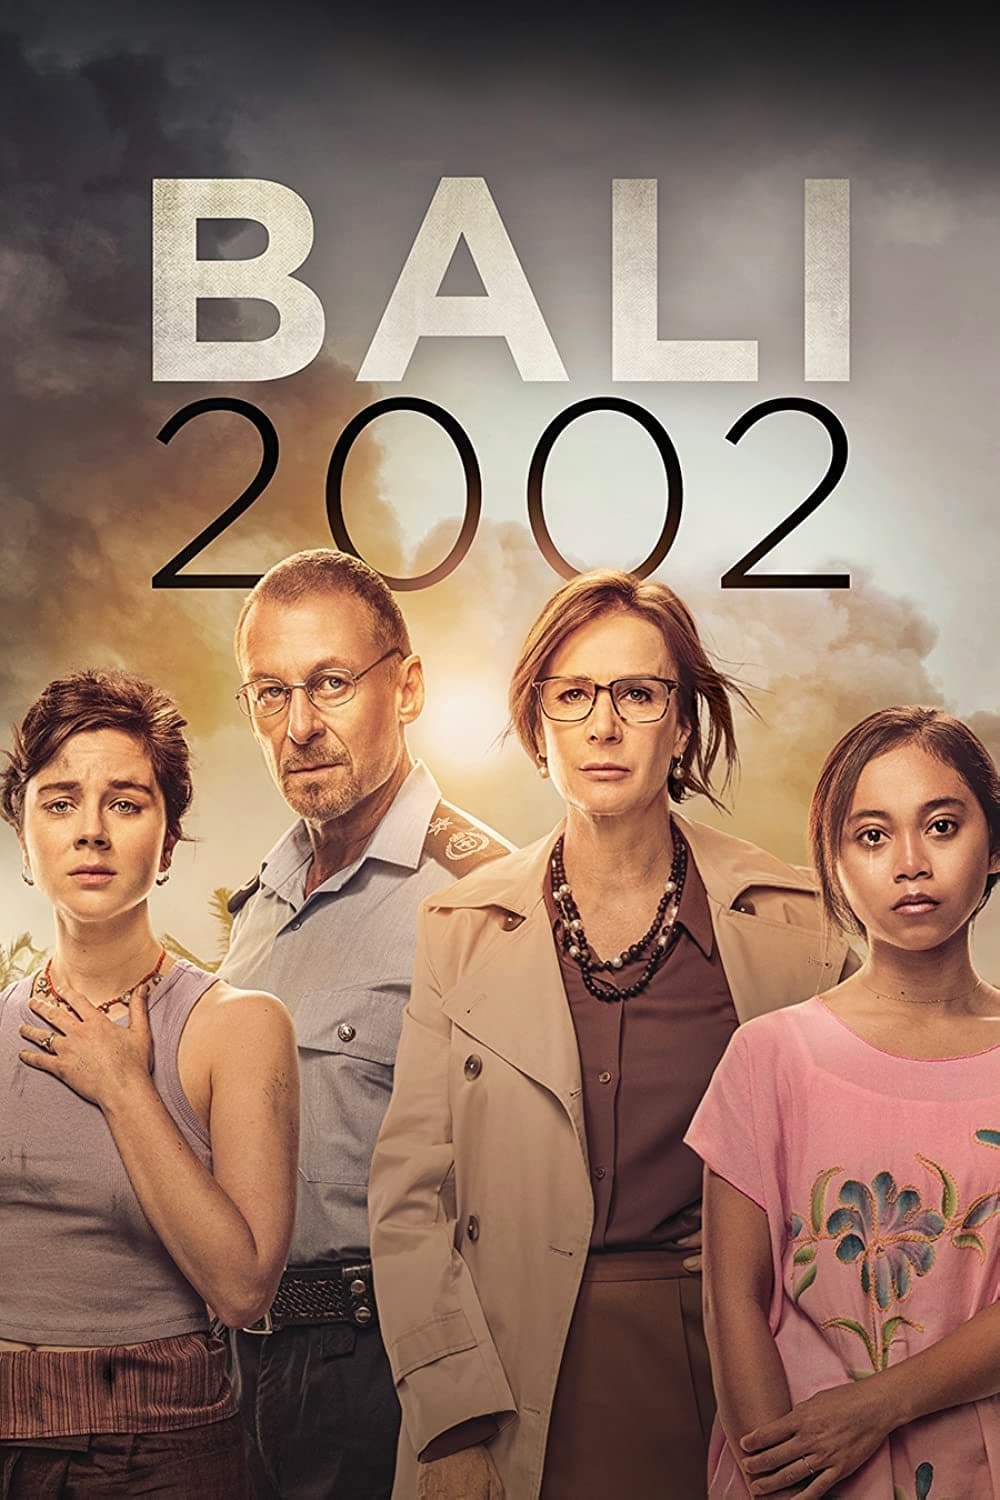 Bali 2002 TV Shows About Based On True Story